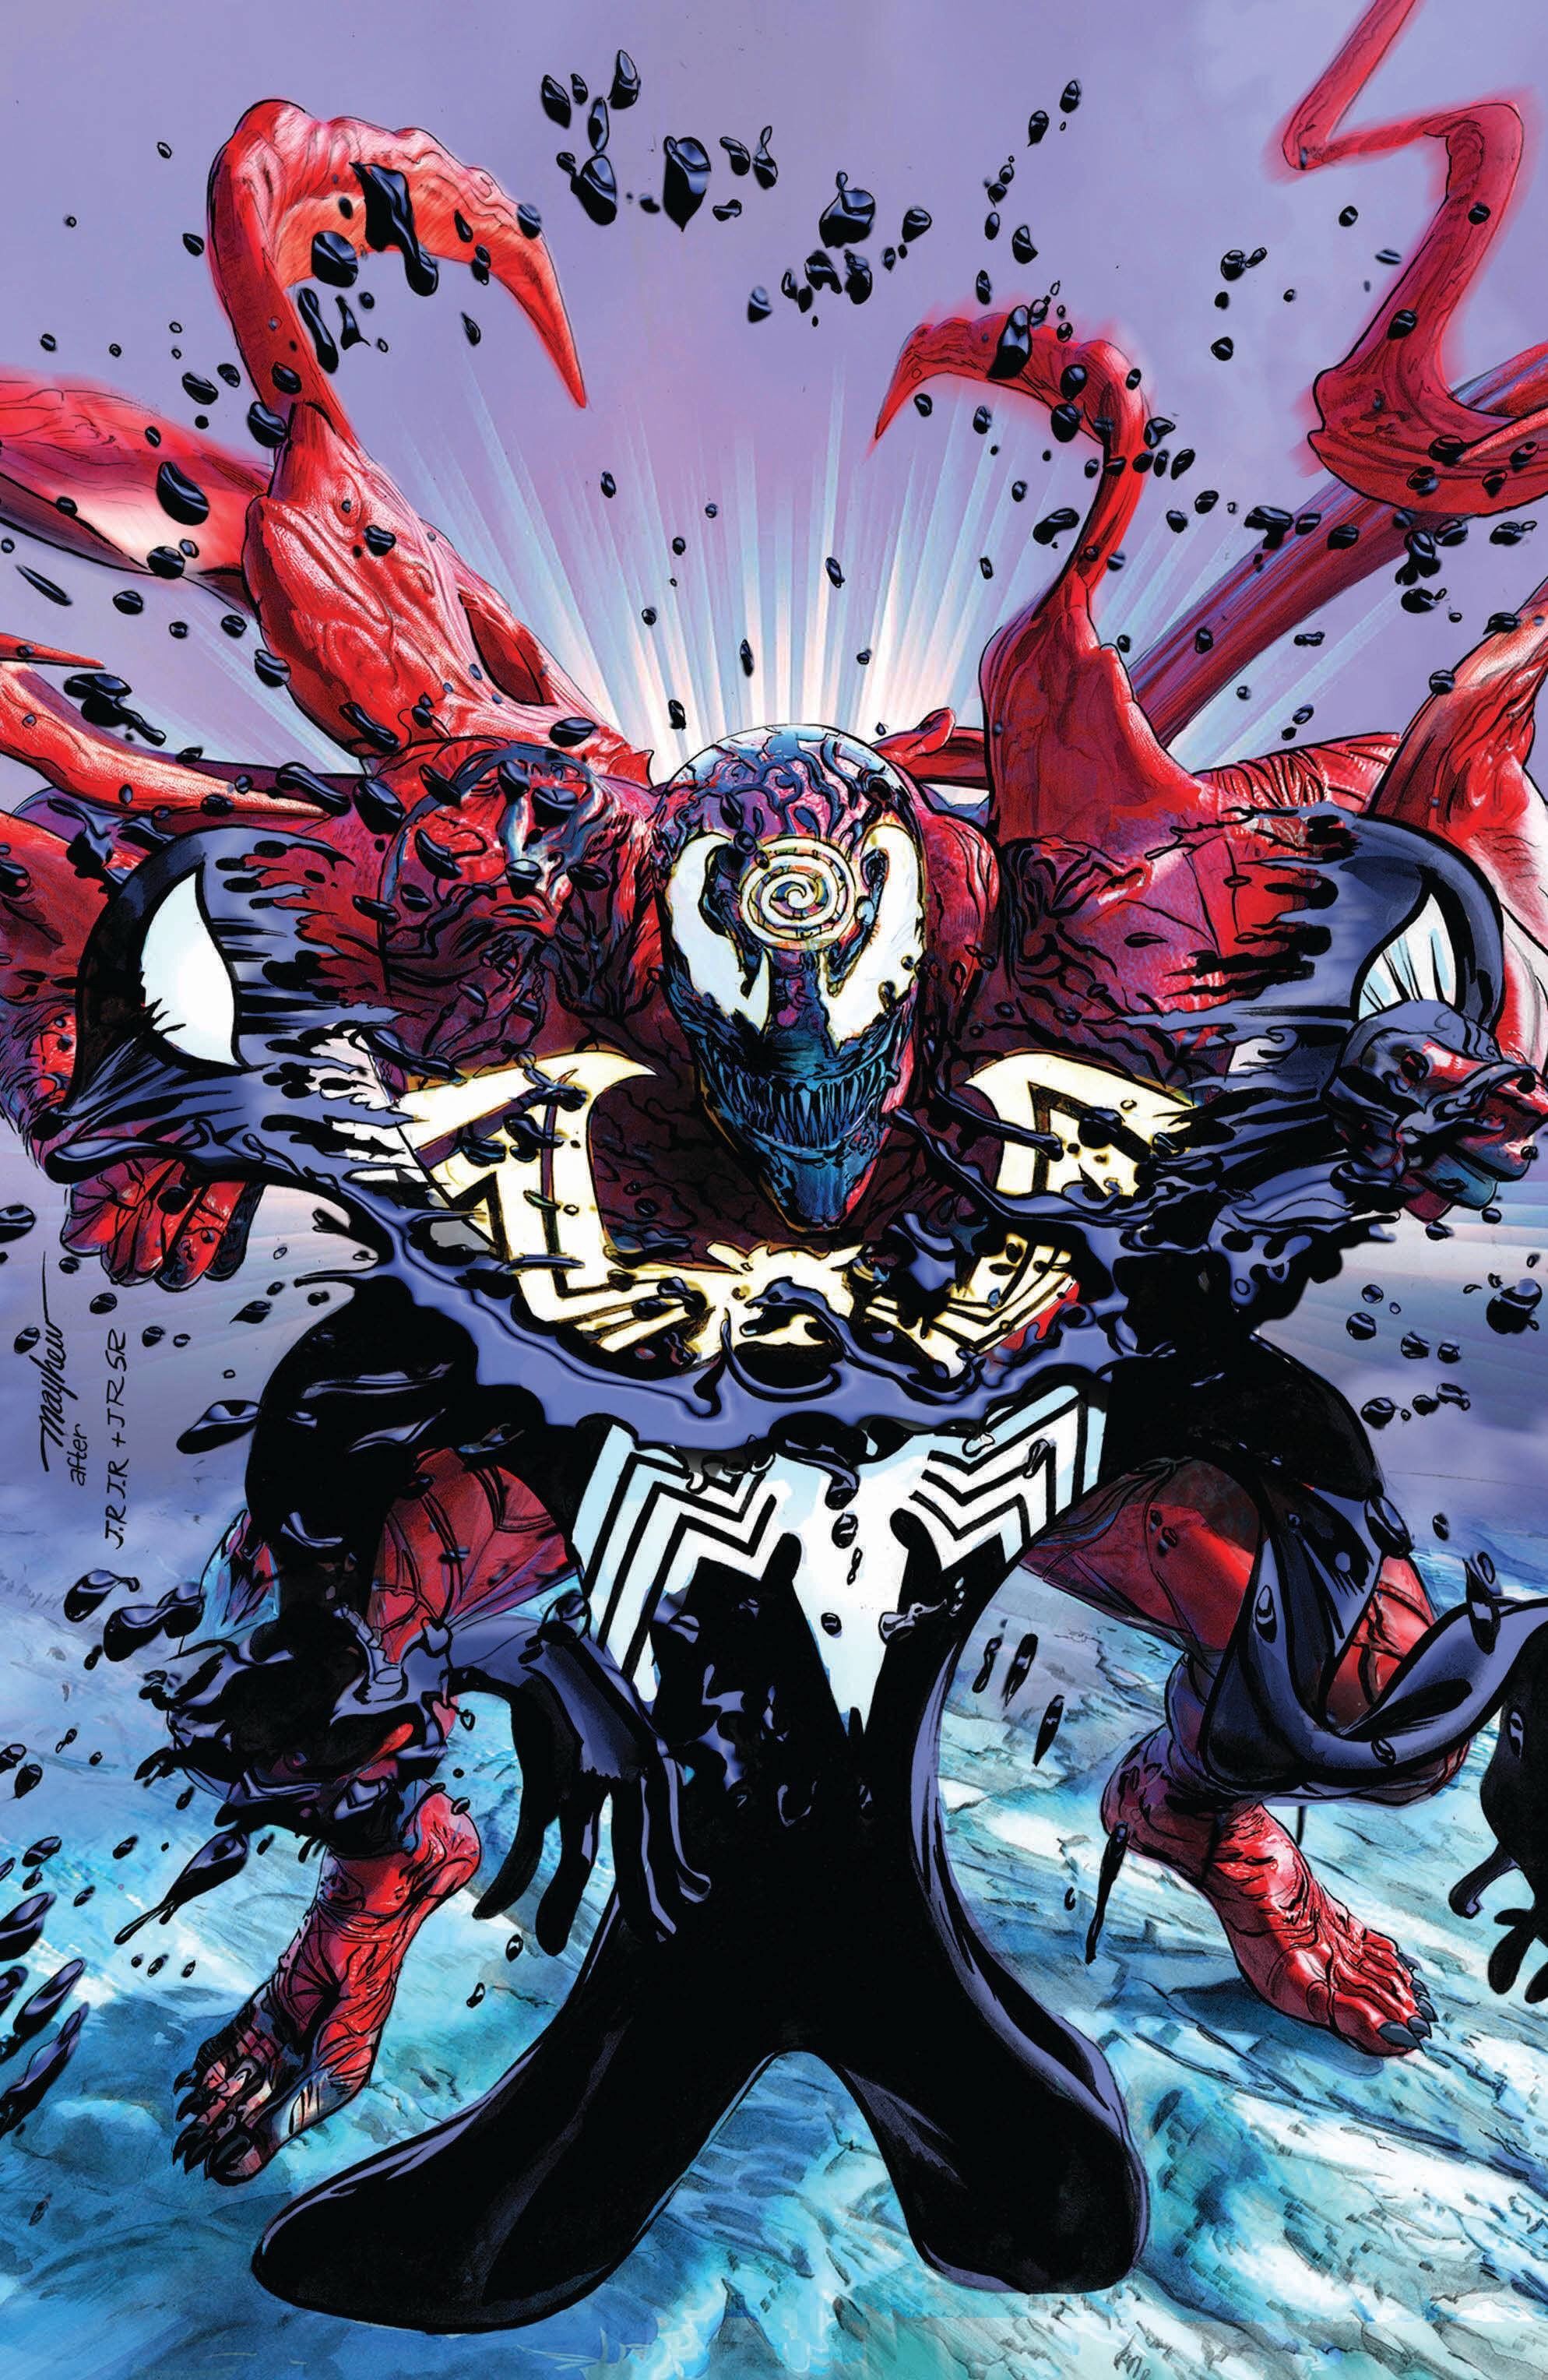 Absolute Carnage / Symbiote Spider Man By Mike Mayhew. Carnage Symbiote, Superhero Comic, Carnage Marvel